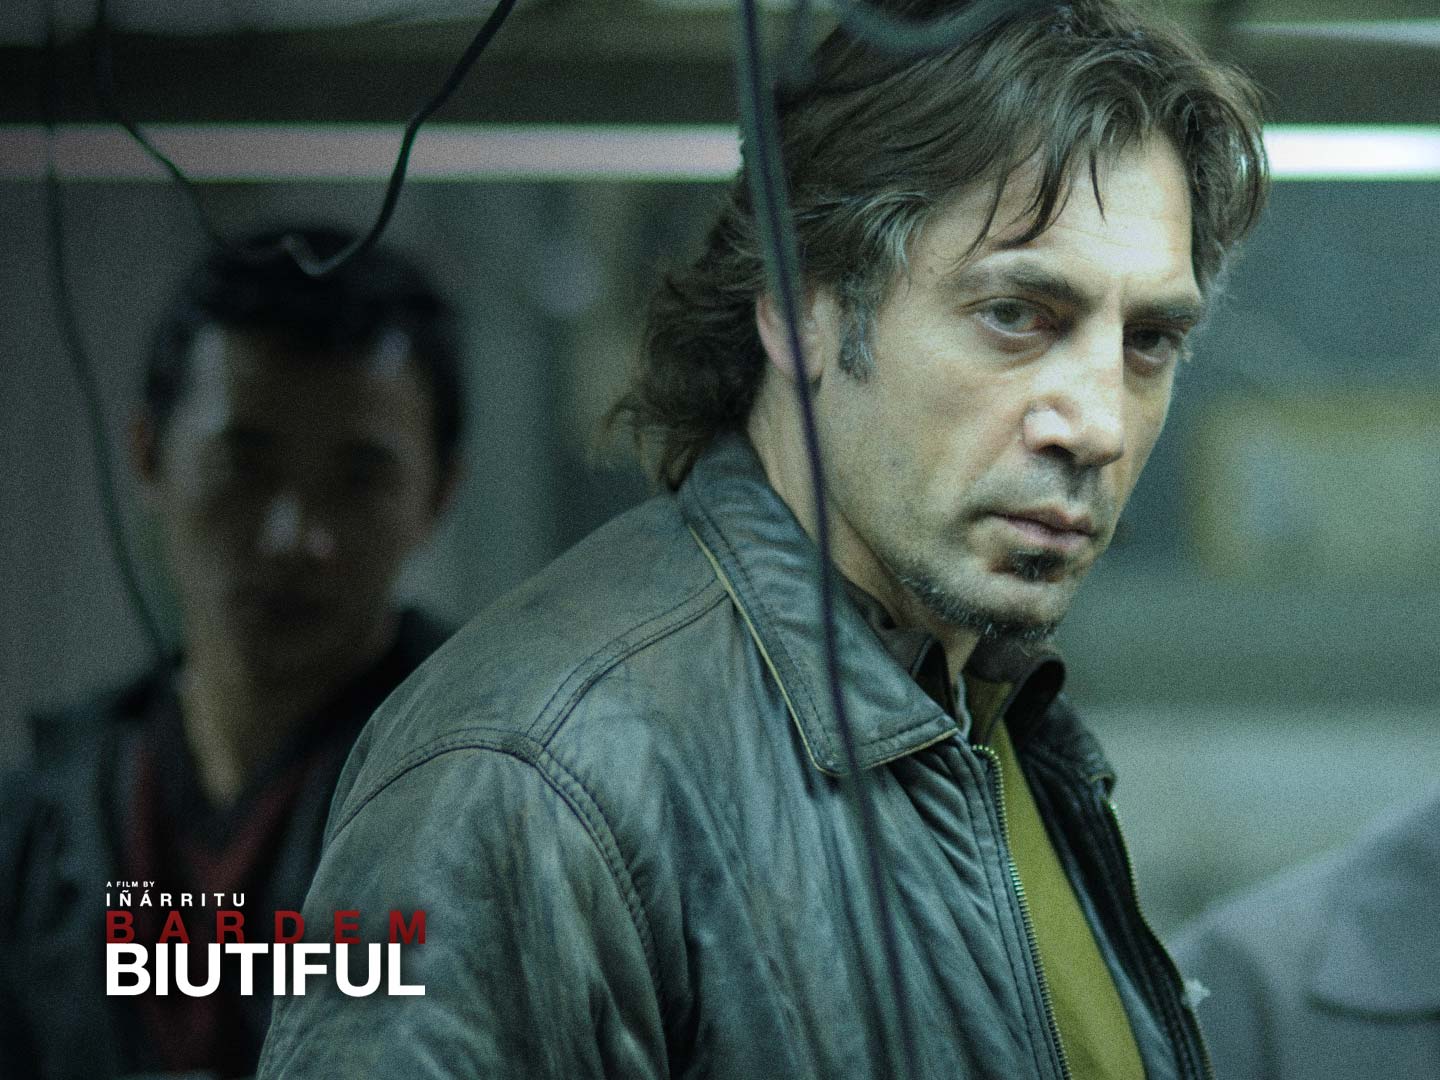 Official Biutiful Movie: Javier Bardem Picture, Photo, Image